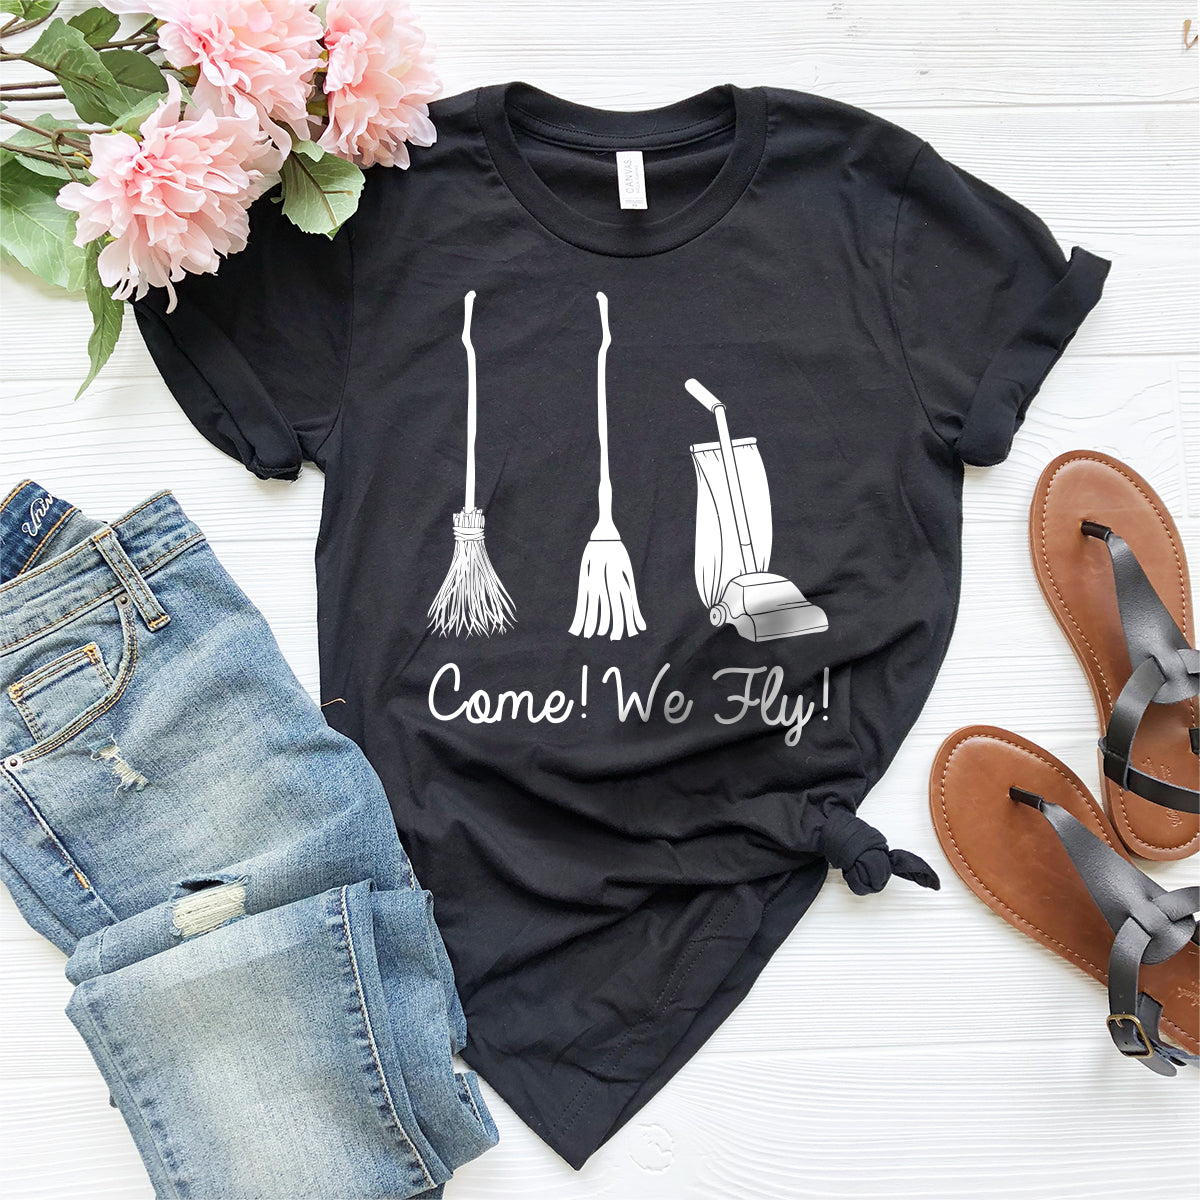 Sanderson Sisters Shirt, Come We Fly T-Shirt, Hocus Pocus Shirt, Fly Broom Shirt, Sanderson Sisters Halloween Tee, Fall Shirt, Witch Shirt - Fastdeliverytees.com